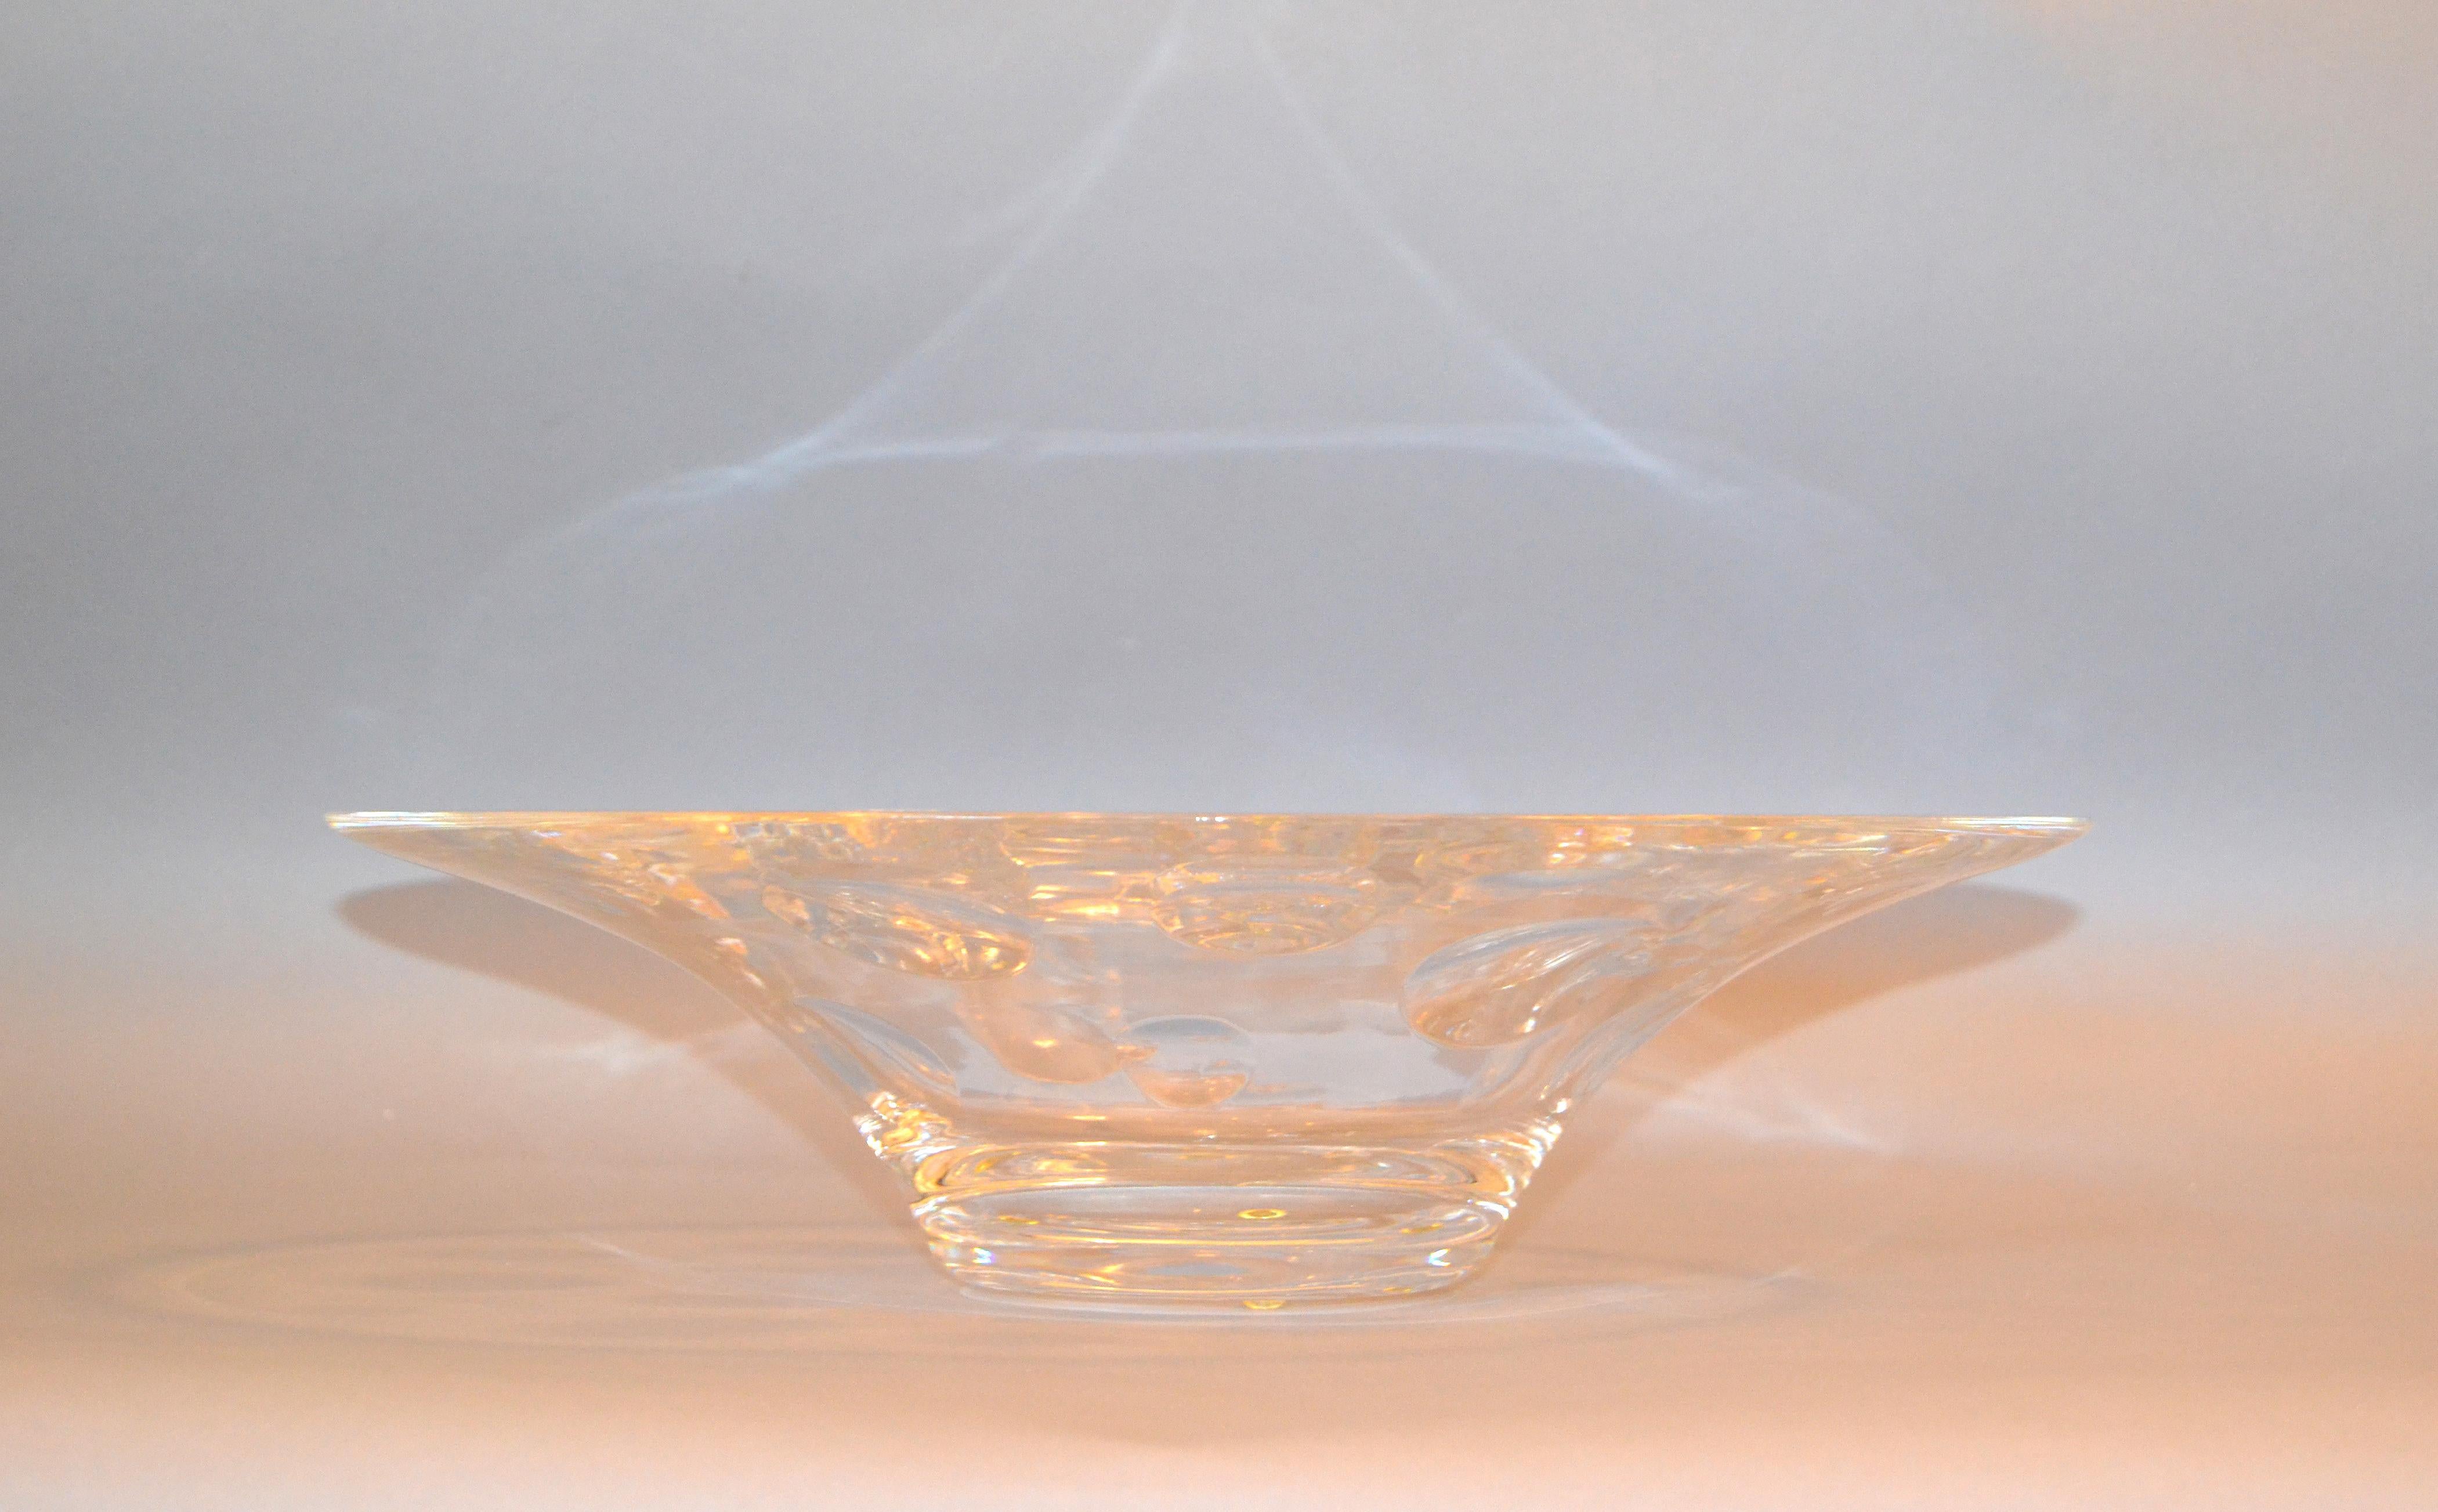 1940s Art Deco large Tiffany & Company art glass crystal bowl with bubbles.
Marked underneath, Tiffany & Co. 
Simply Lovely and made with great craftsmanship.